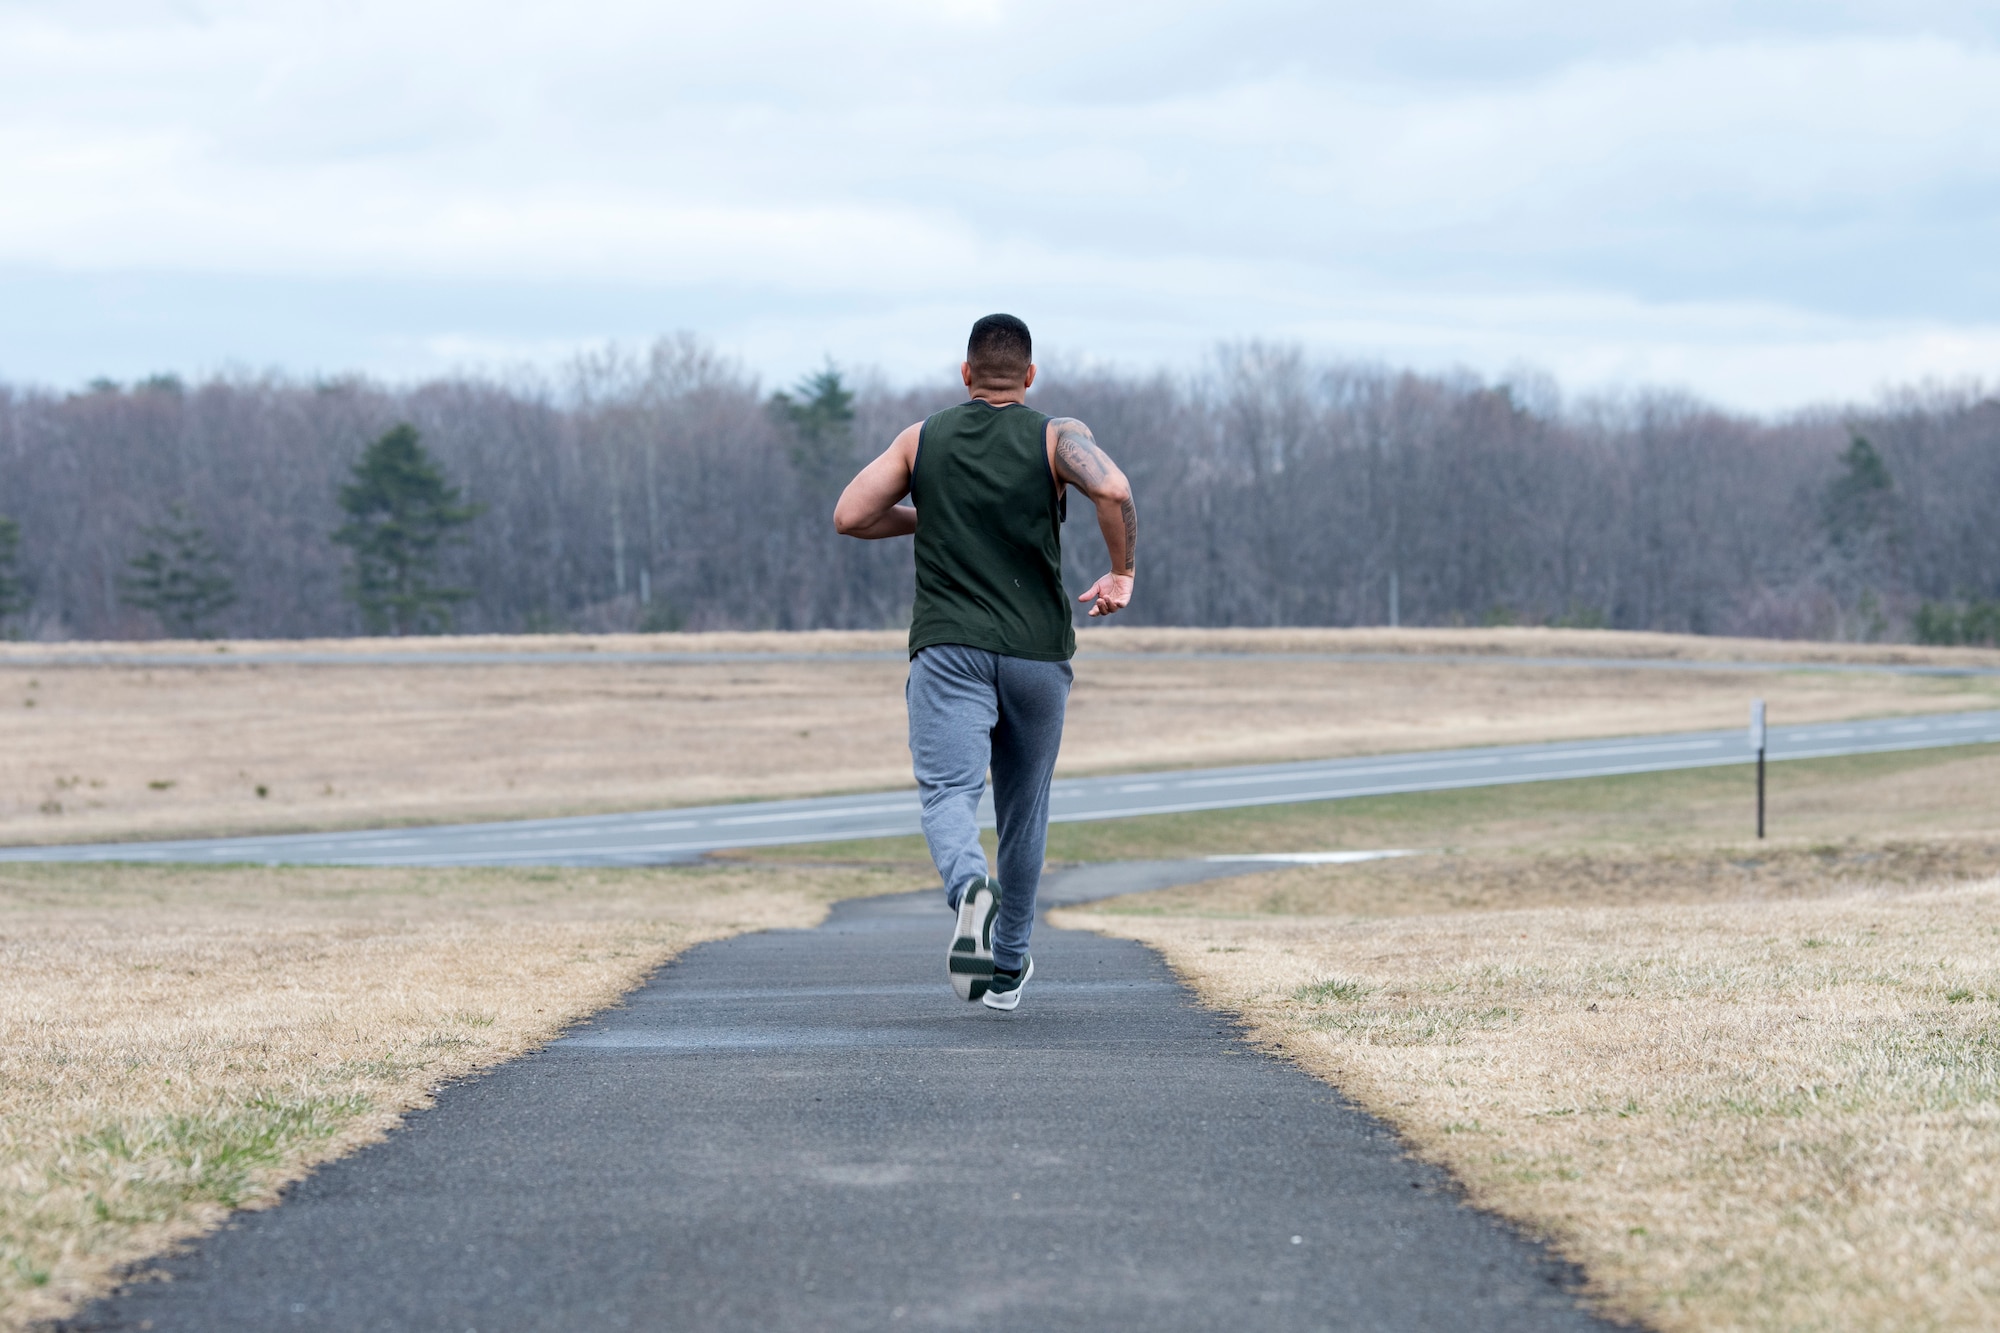 U.S. Air Force 1st Lt. Jeremy E. Garcia, a 35th Fighter Wing public affairs officer, begins his run across Misawa Air Base to continue to lose weight and develop mental resiliency. He began running to redefine his identity and turn himself into a better leader for his Airmen.  (U.S. Air Force photo by Staff Sgt. Brittany A. Chase)